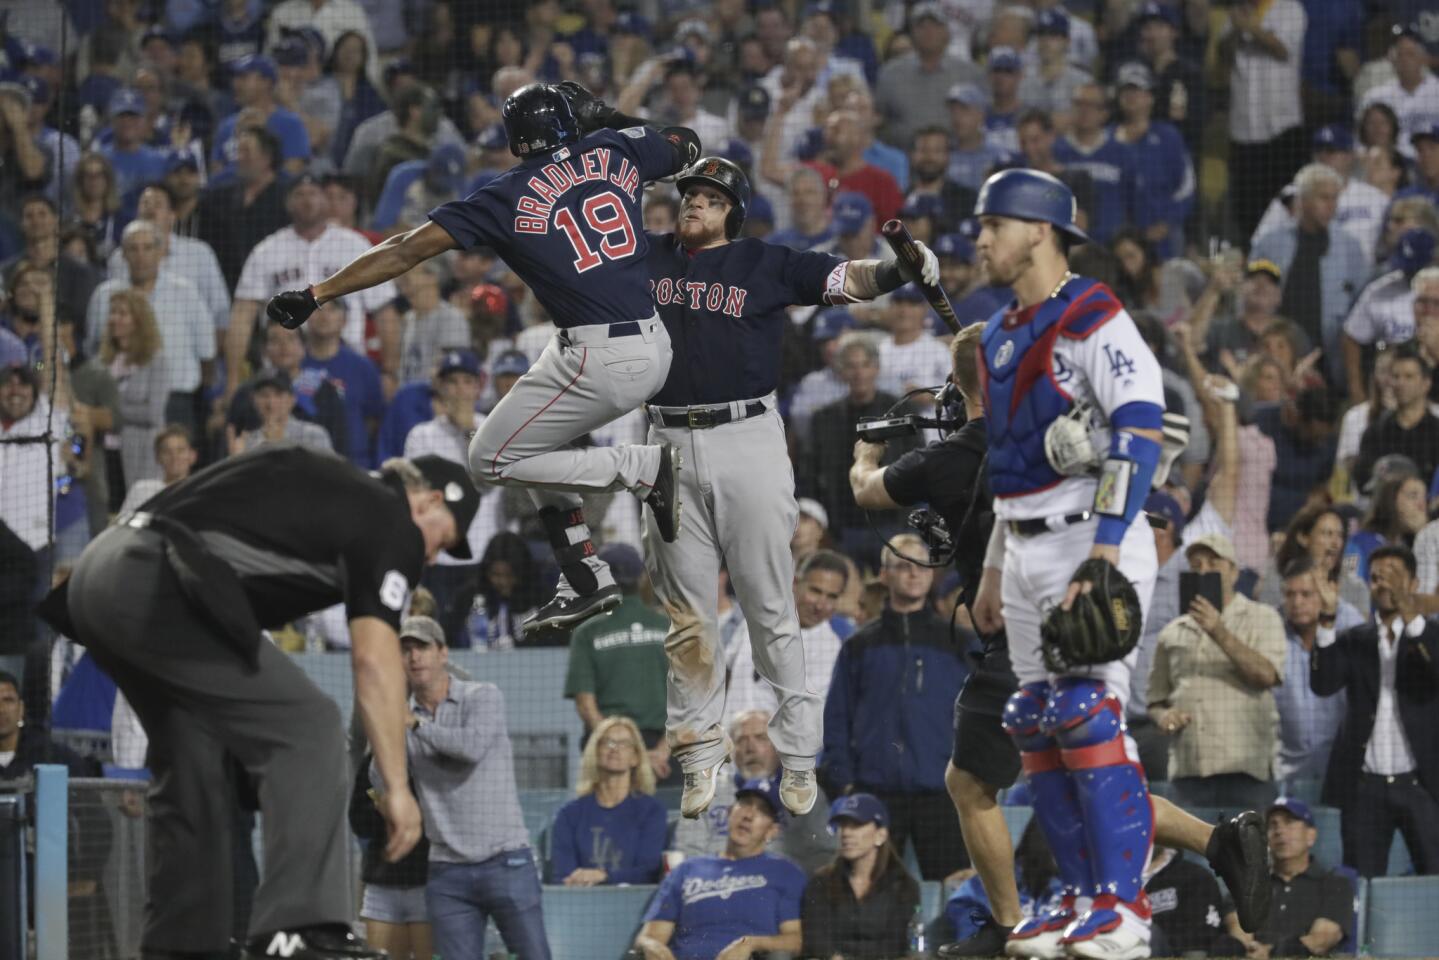 While Dodgers Yasmandi Grandal waits, Red Sox's Christiian Vasquez, right celebrates Jackie Bradley Jr.’s eighth inning homer, tying the game at one.